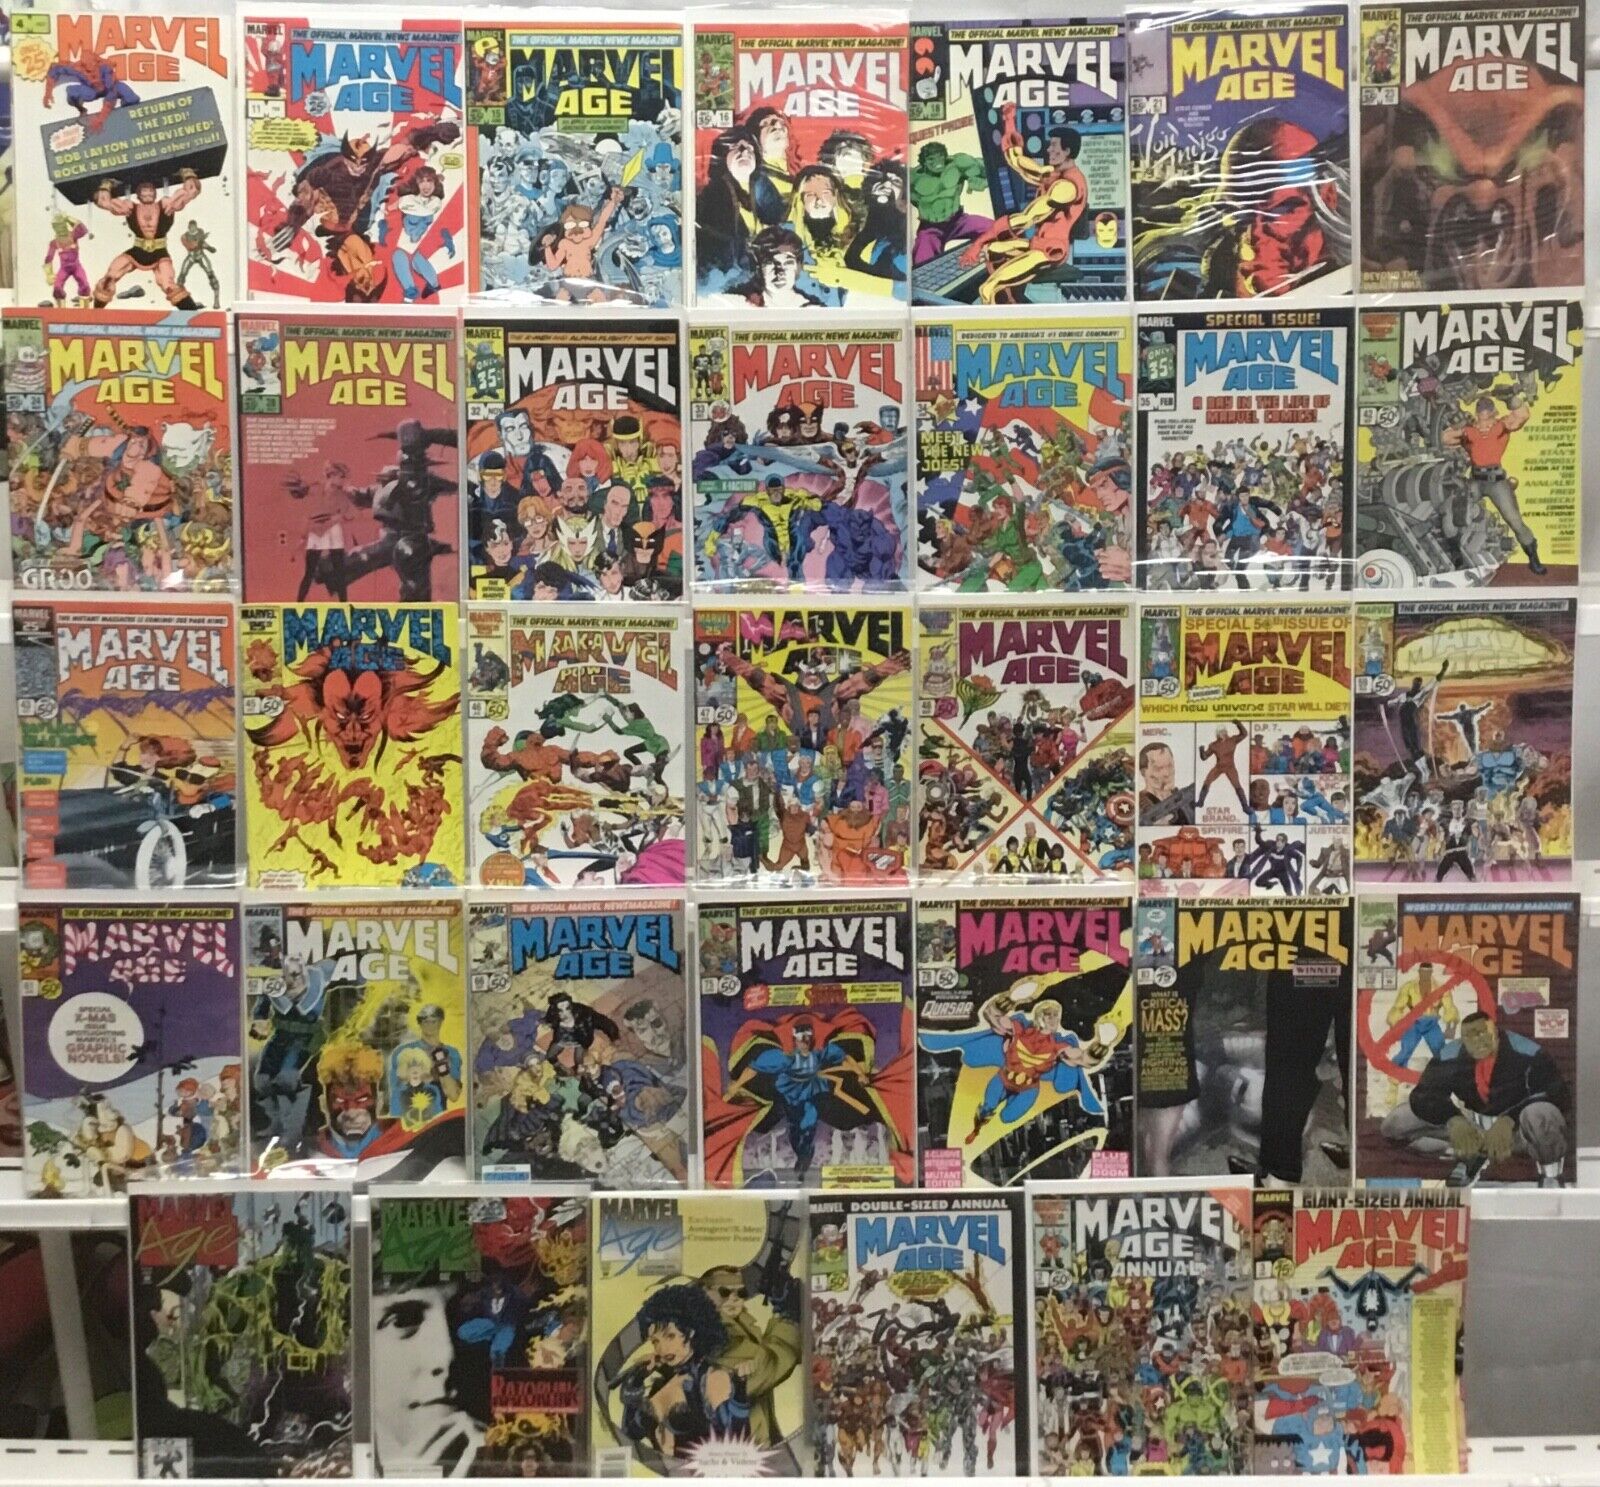 Marvel Comics - Marvel Age - Comic Book Lot of 34 Issues